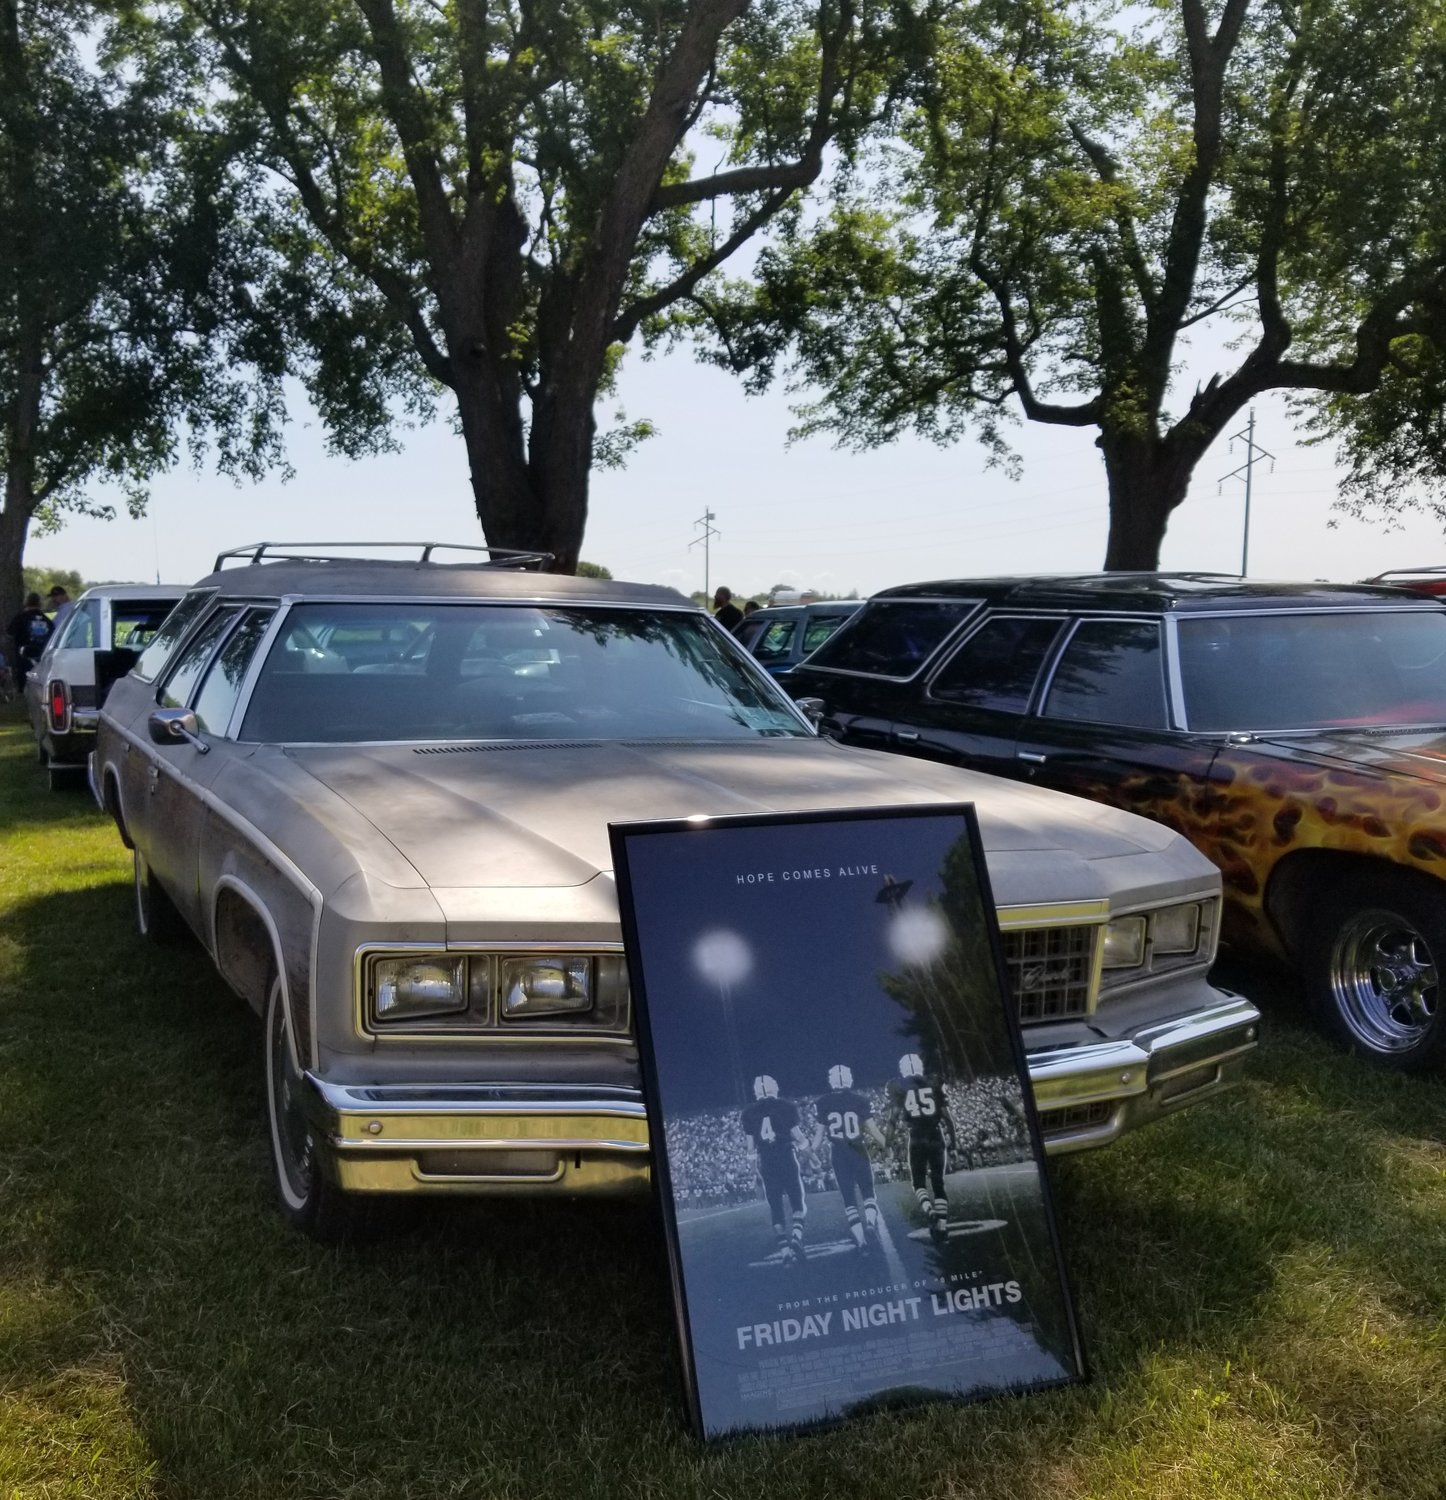 This car show favorite owned by Mike Bathke of Waseca was used in the movie and television series "Friday Night Lights".  It is one of several Clamshell wagons he owns and had on display during Clam-Fest at the Hilbert Strusz farm near Goodhue on July 30th and 31st.